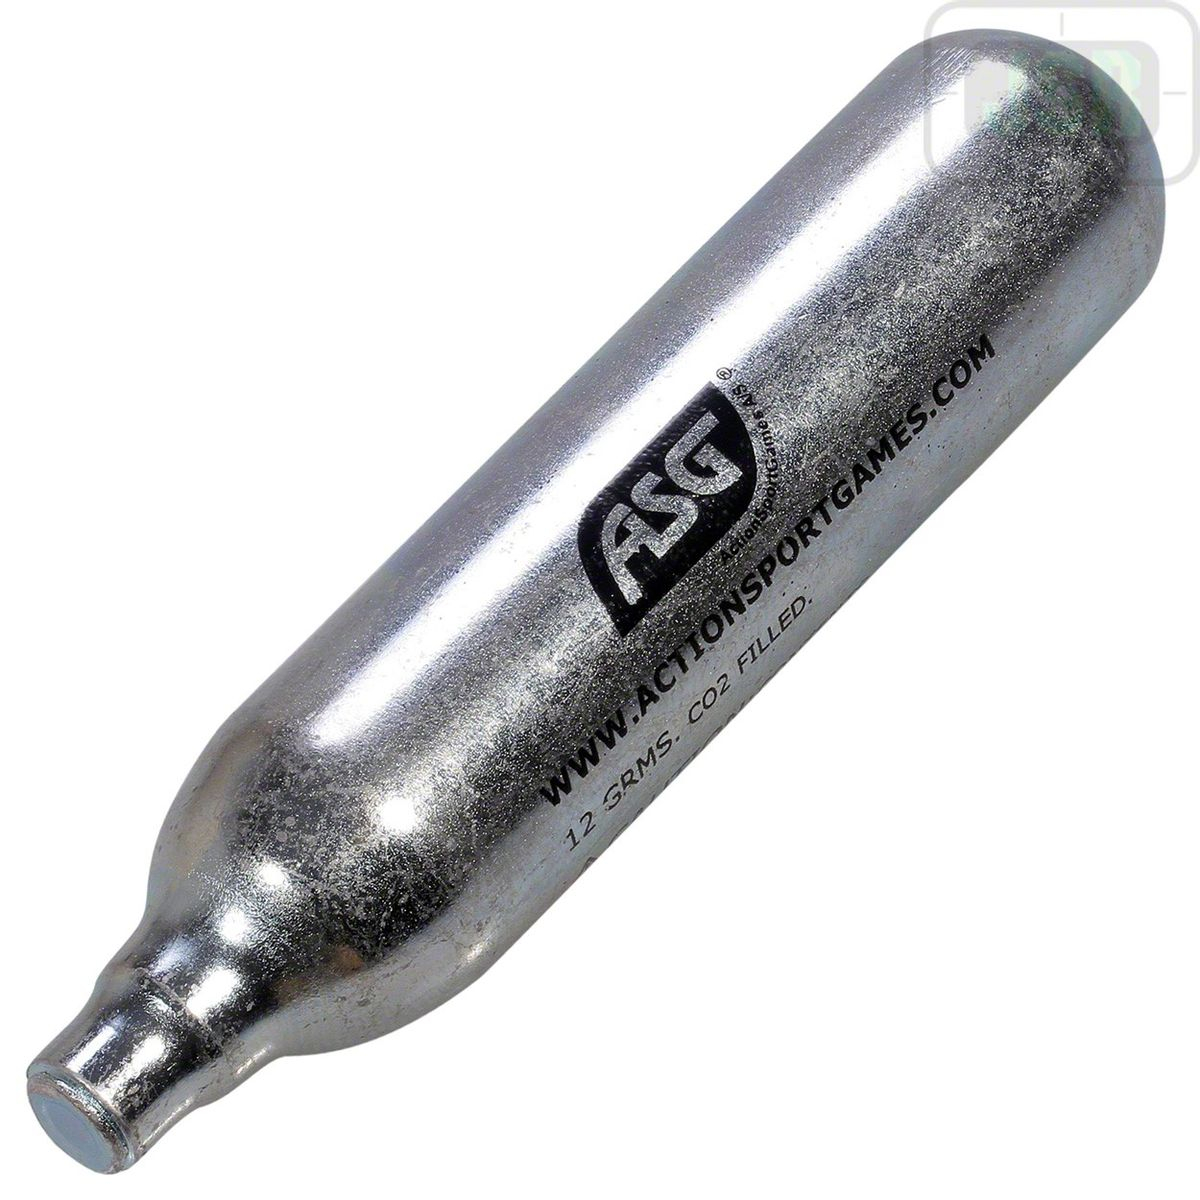 ASG Co2 12g Gas Canister